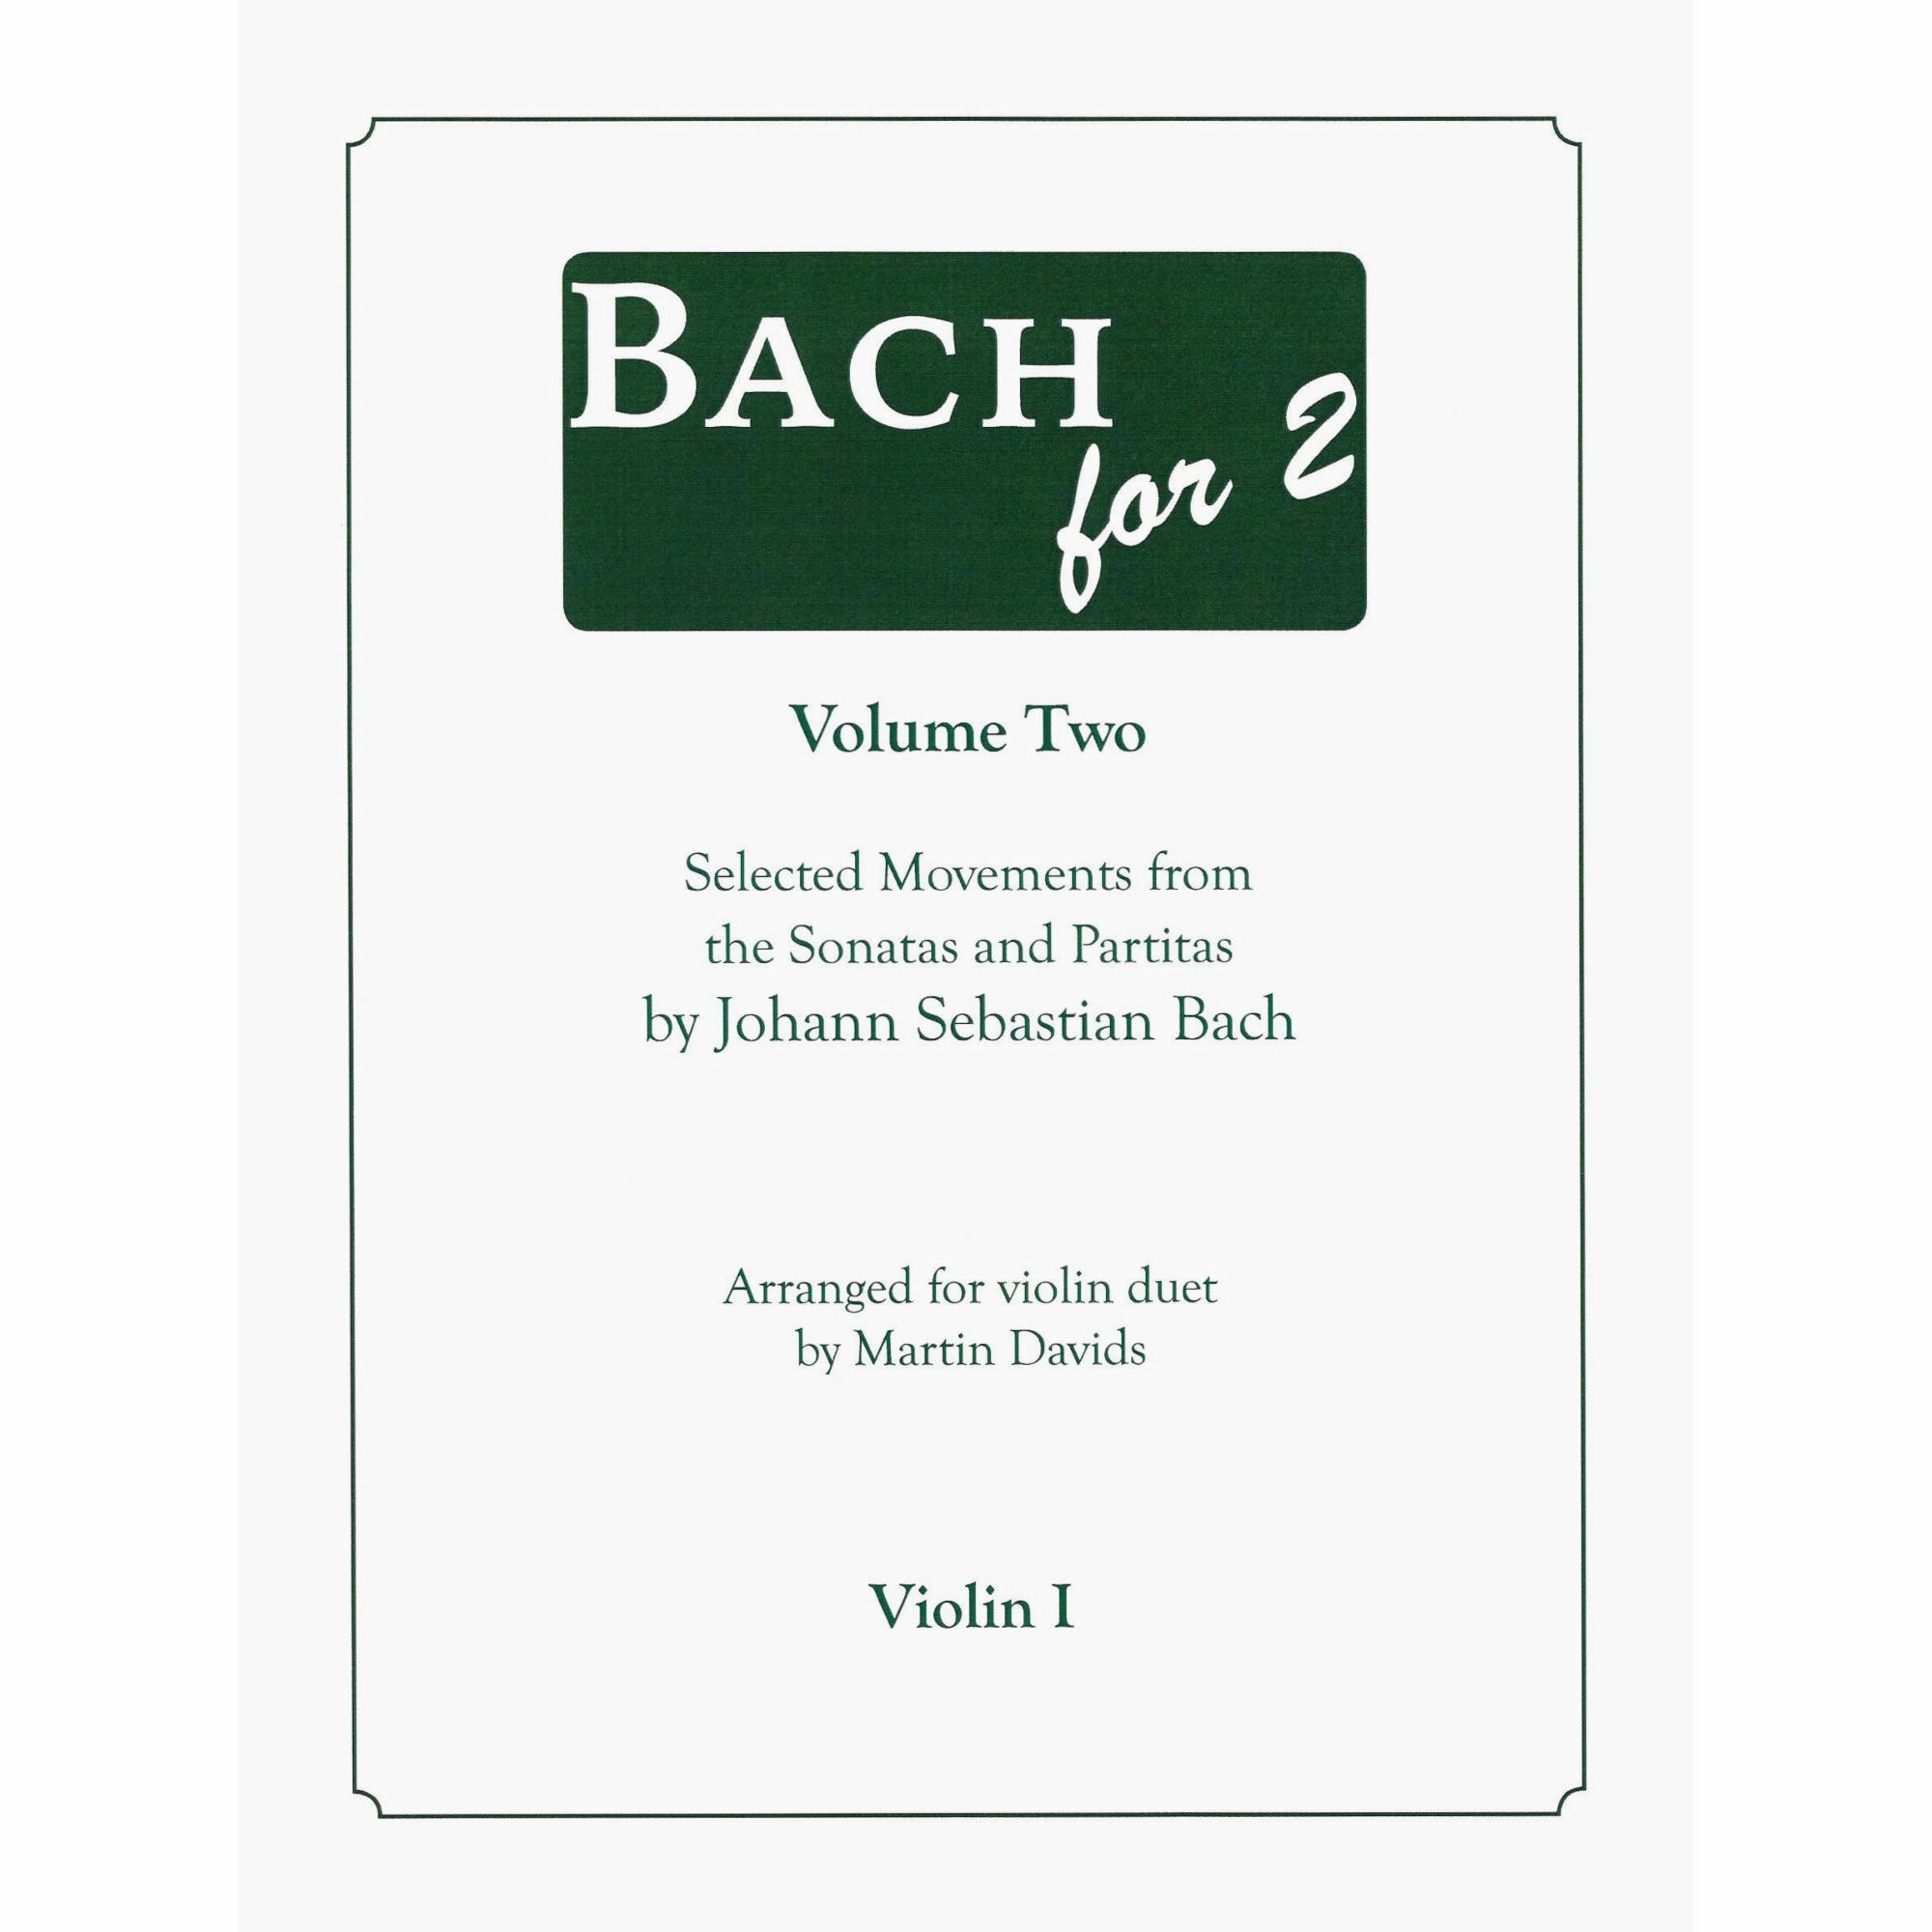 Bach for 2, Volume Two for Two Violins